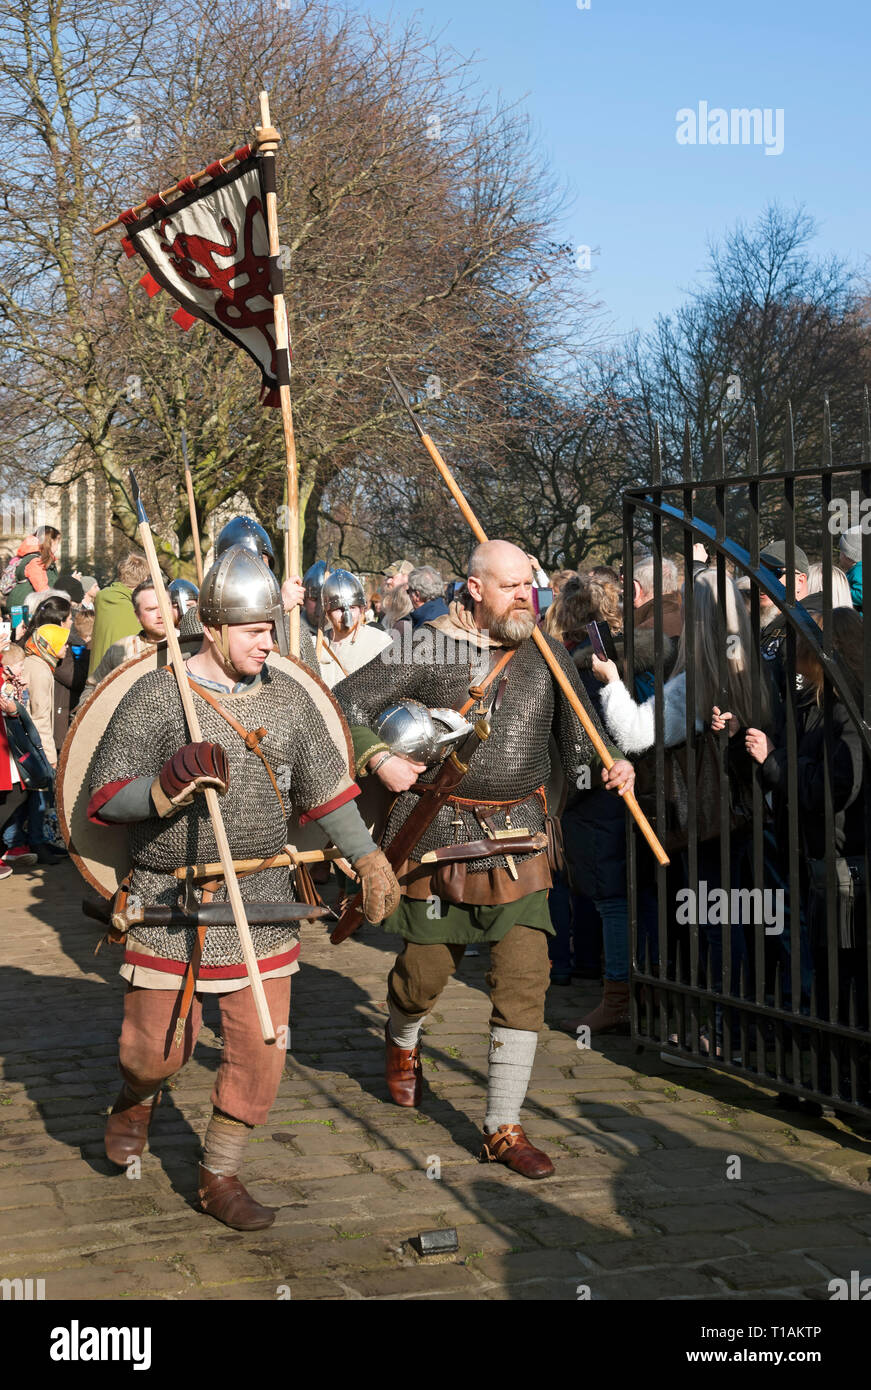 Procession of people in costume at the Viking Festival York North Yorkshire England UK United Kingdom GB Great Britain Stock Photo